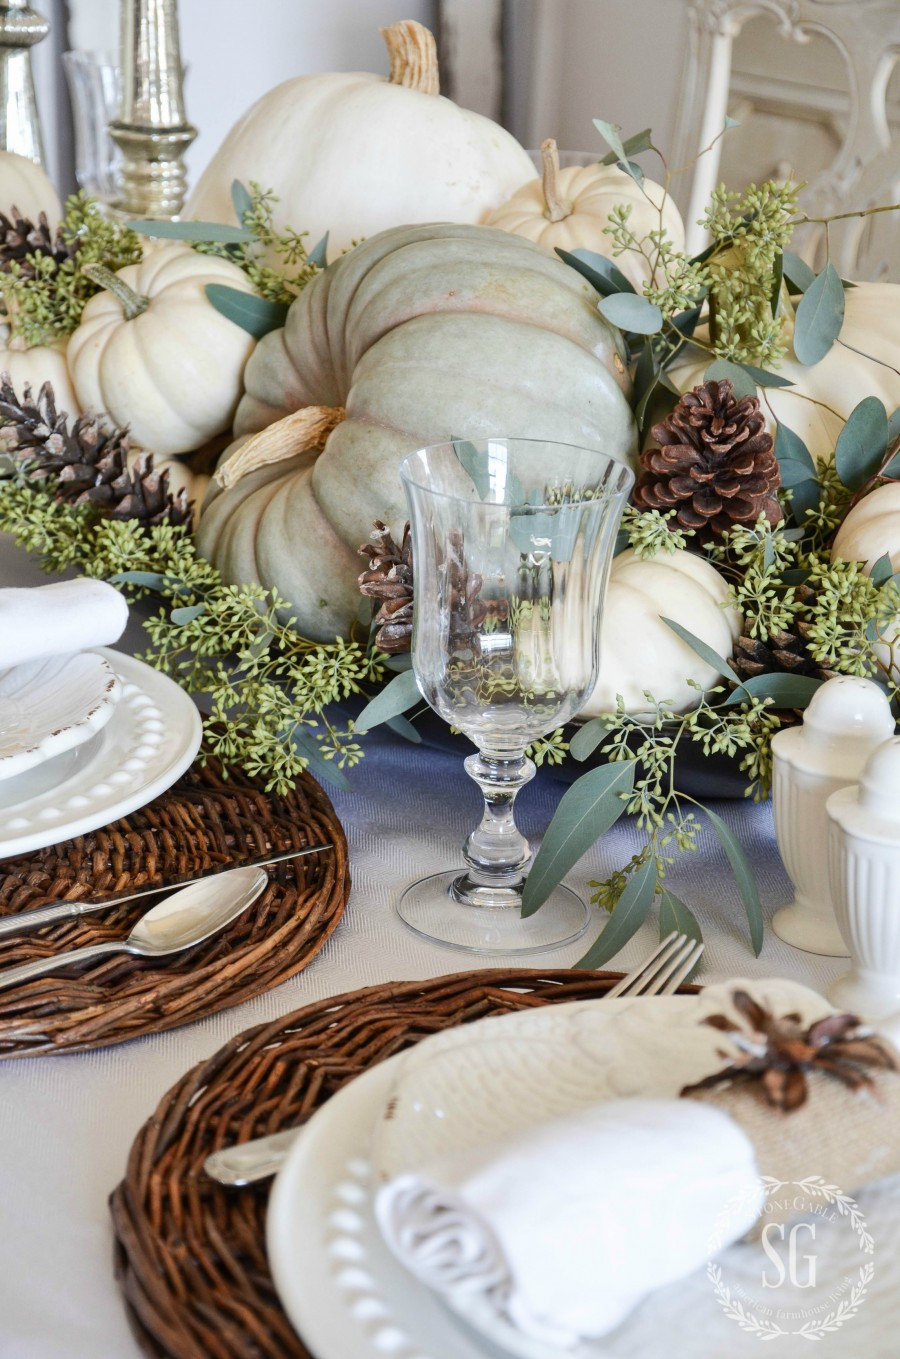 Table Decorations For Thanksgiving
 SOFT AND NATURAL THANKSGIVING TABLESCAPE